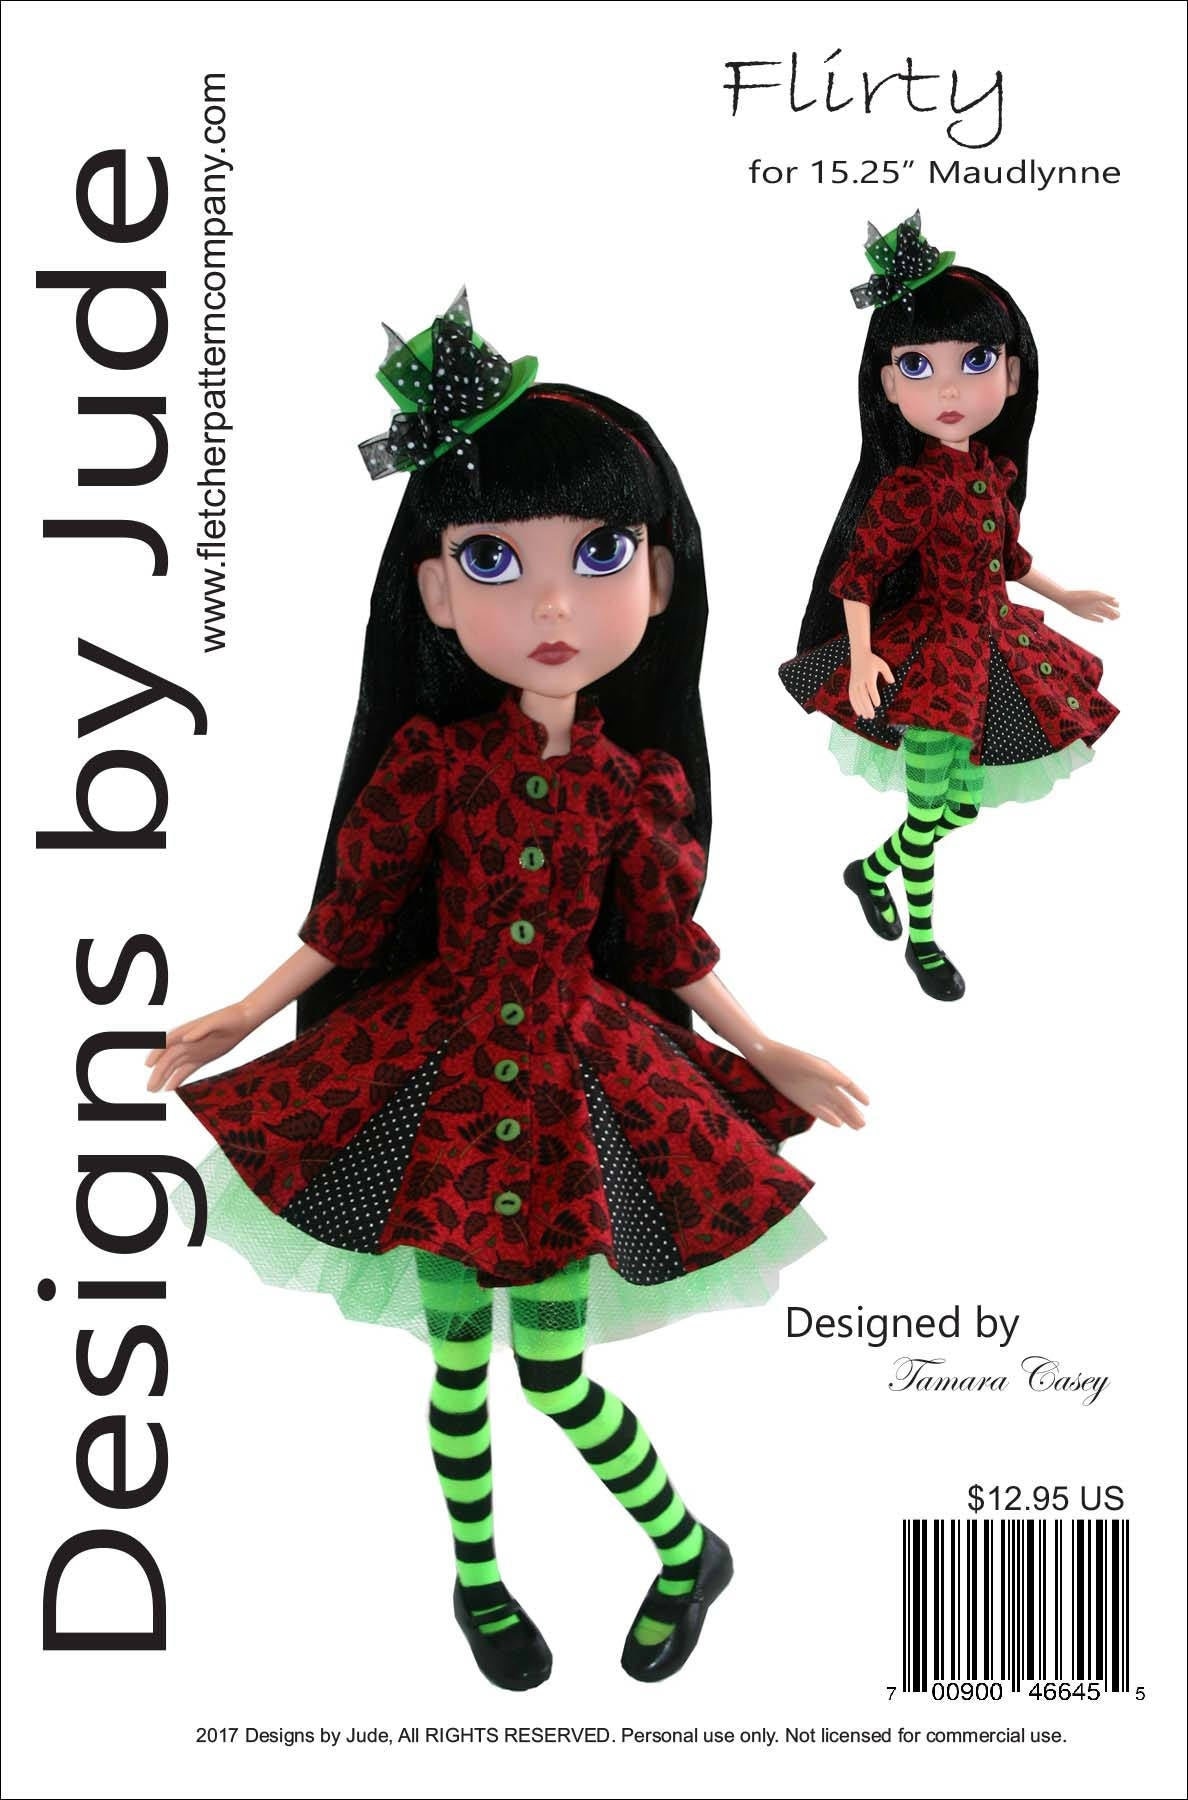 Riding Hood Doll Clothes Sewing Pattern for 15.25" Maudlynne Tonner 